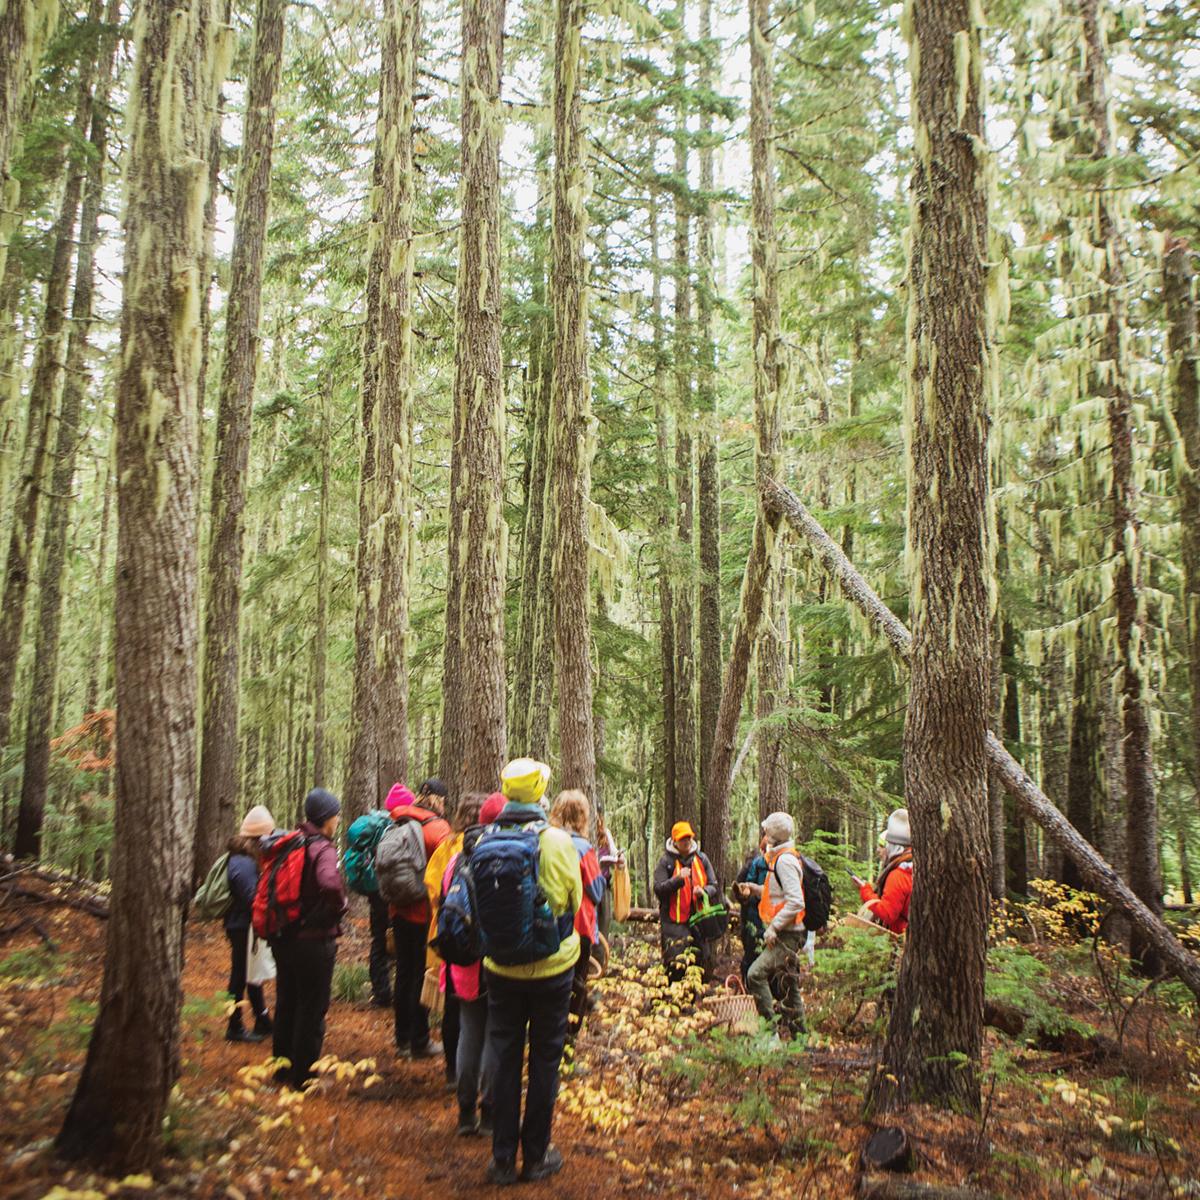 Foraging in Gifford Pinchot National Forest.